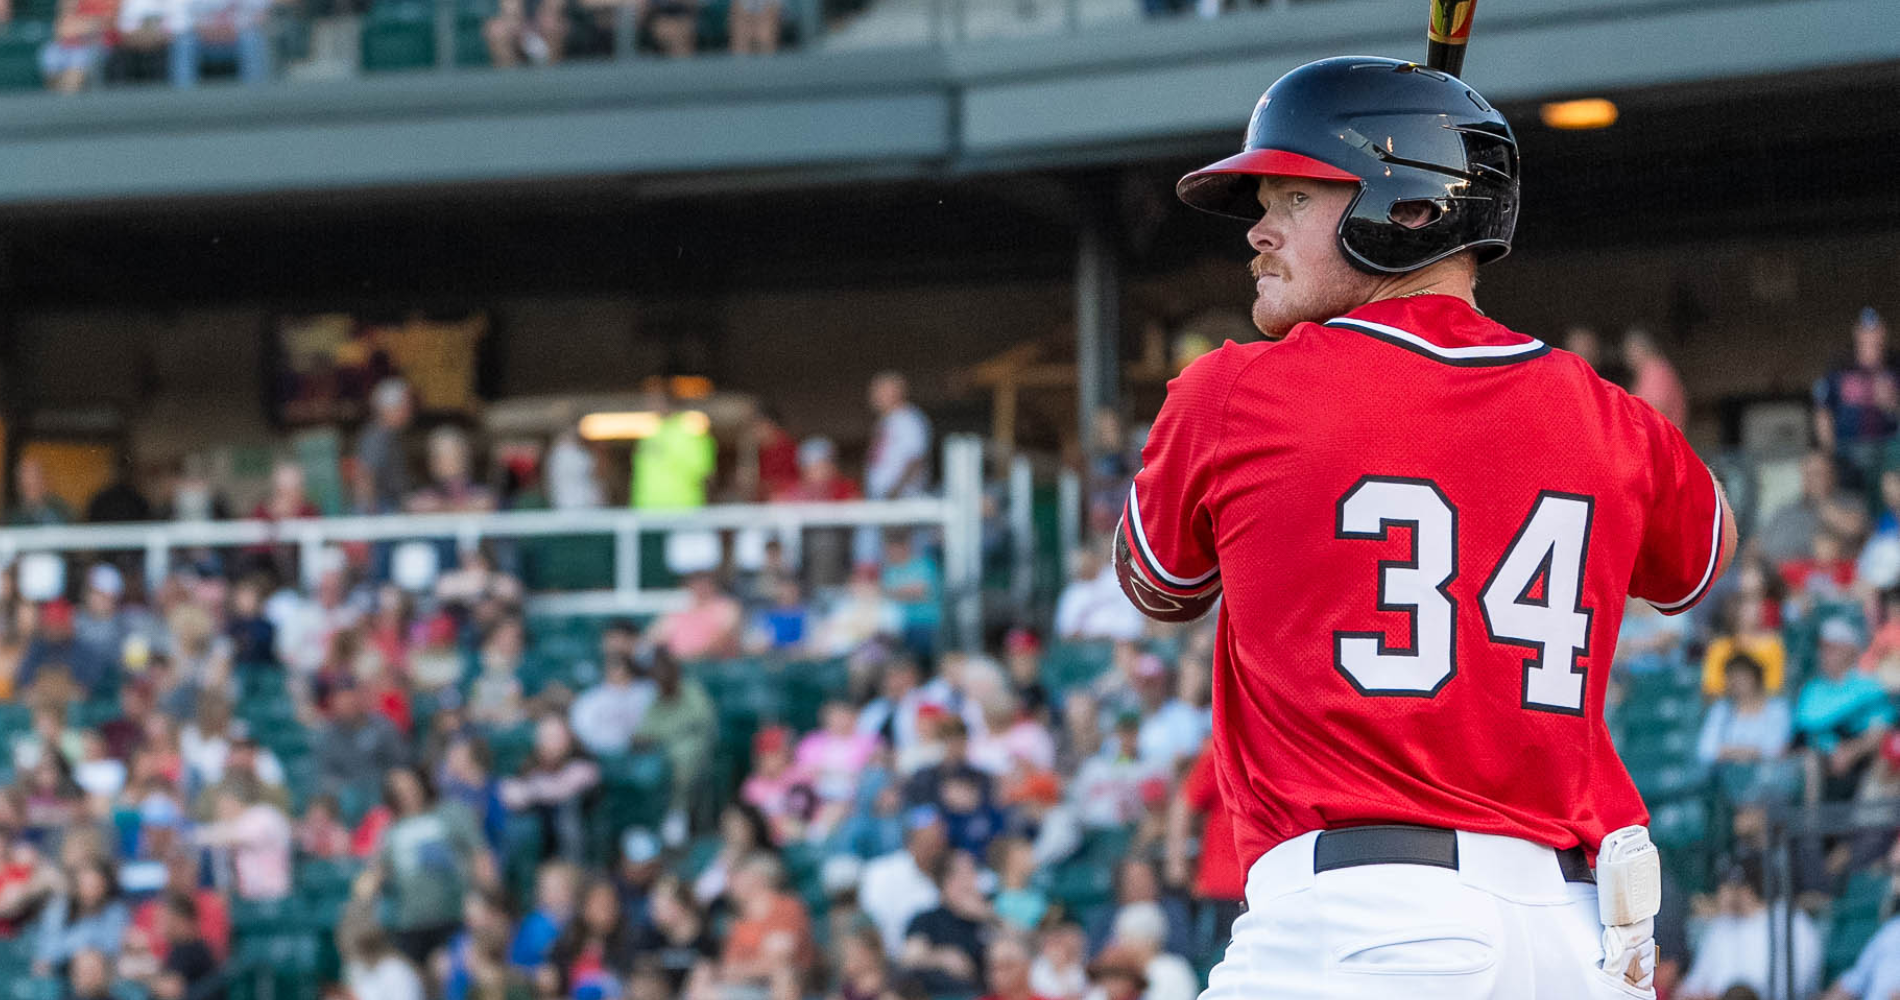 Jake Hjelle homers in loss to Chicago